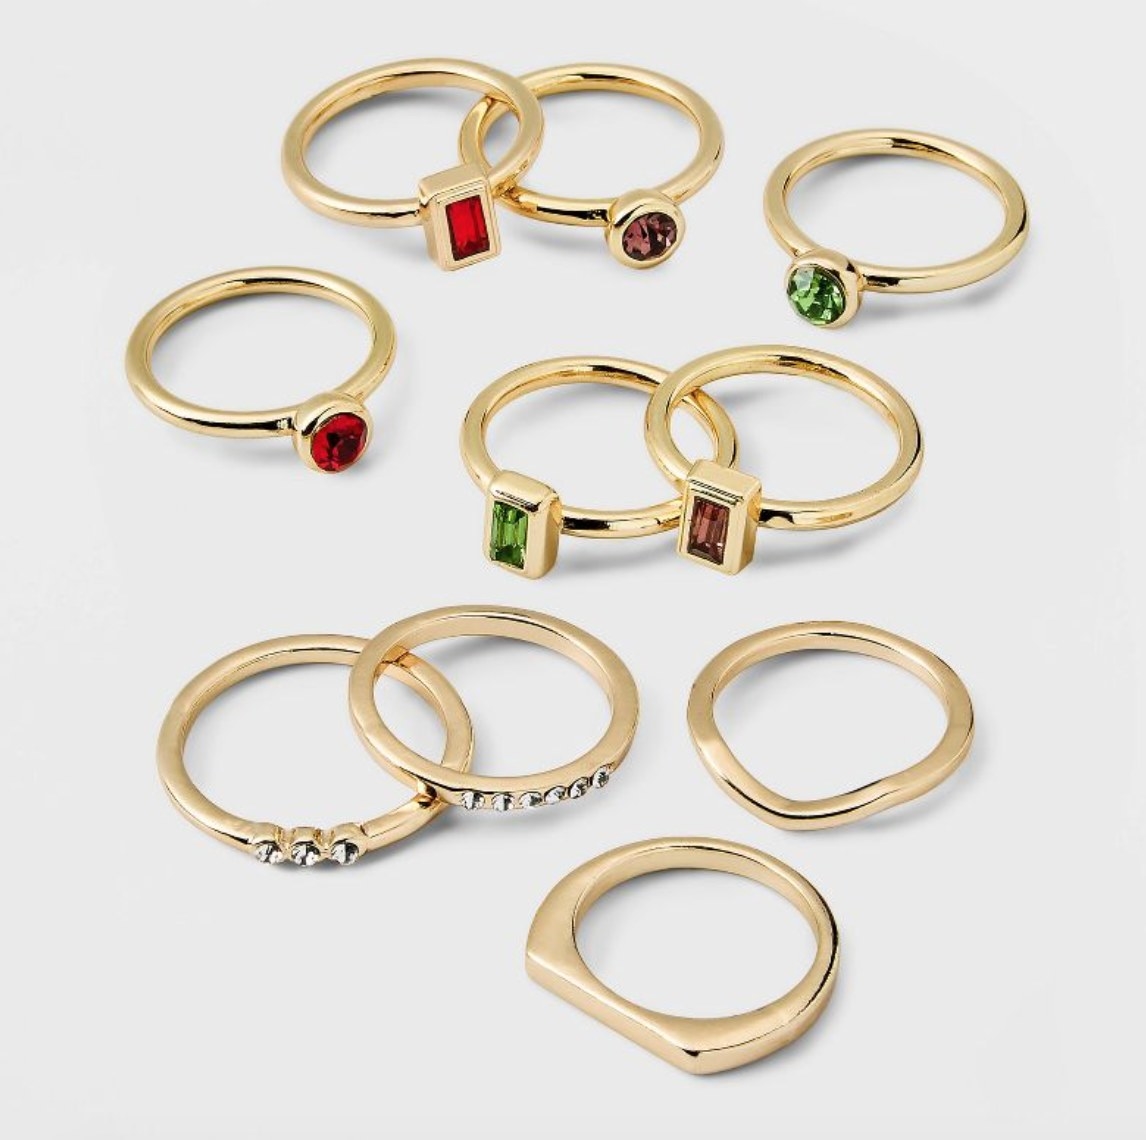 the gold finish set of gem rings